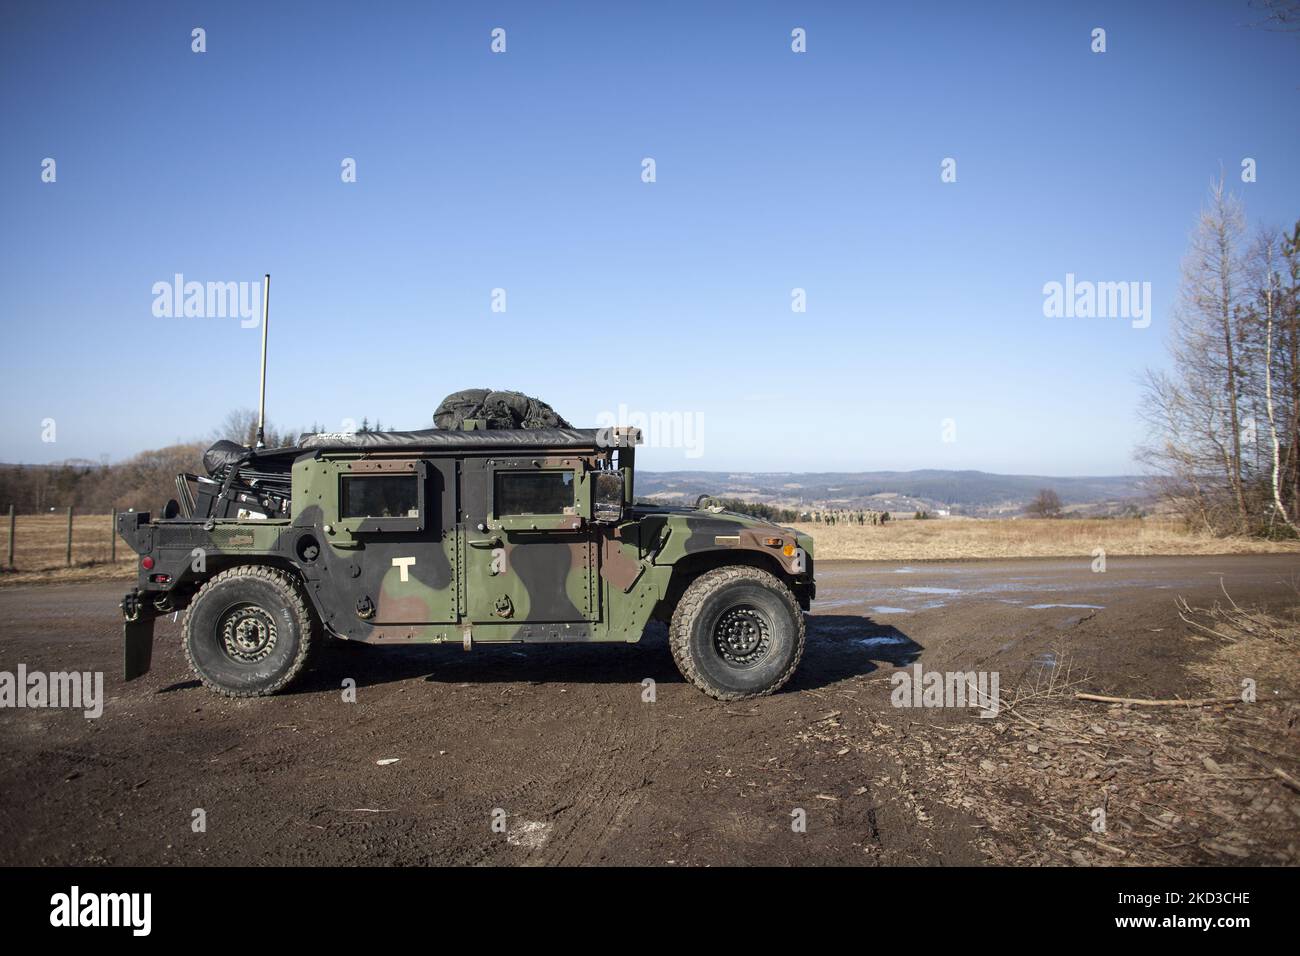 American soldiers sent to the Polish-Ukrainian border in connection with the crisis in Ukraine seen near arlamow on February 24, 2022. (Photo by Maciej Luczniewski/NurPhoto) Stock Photo